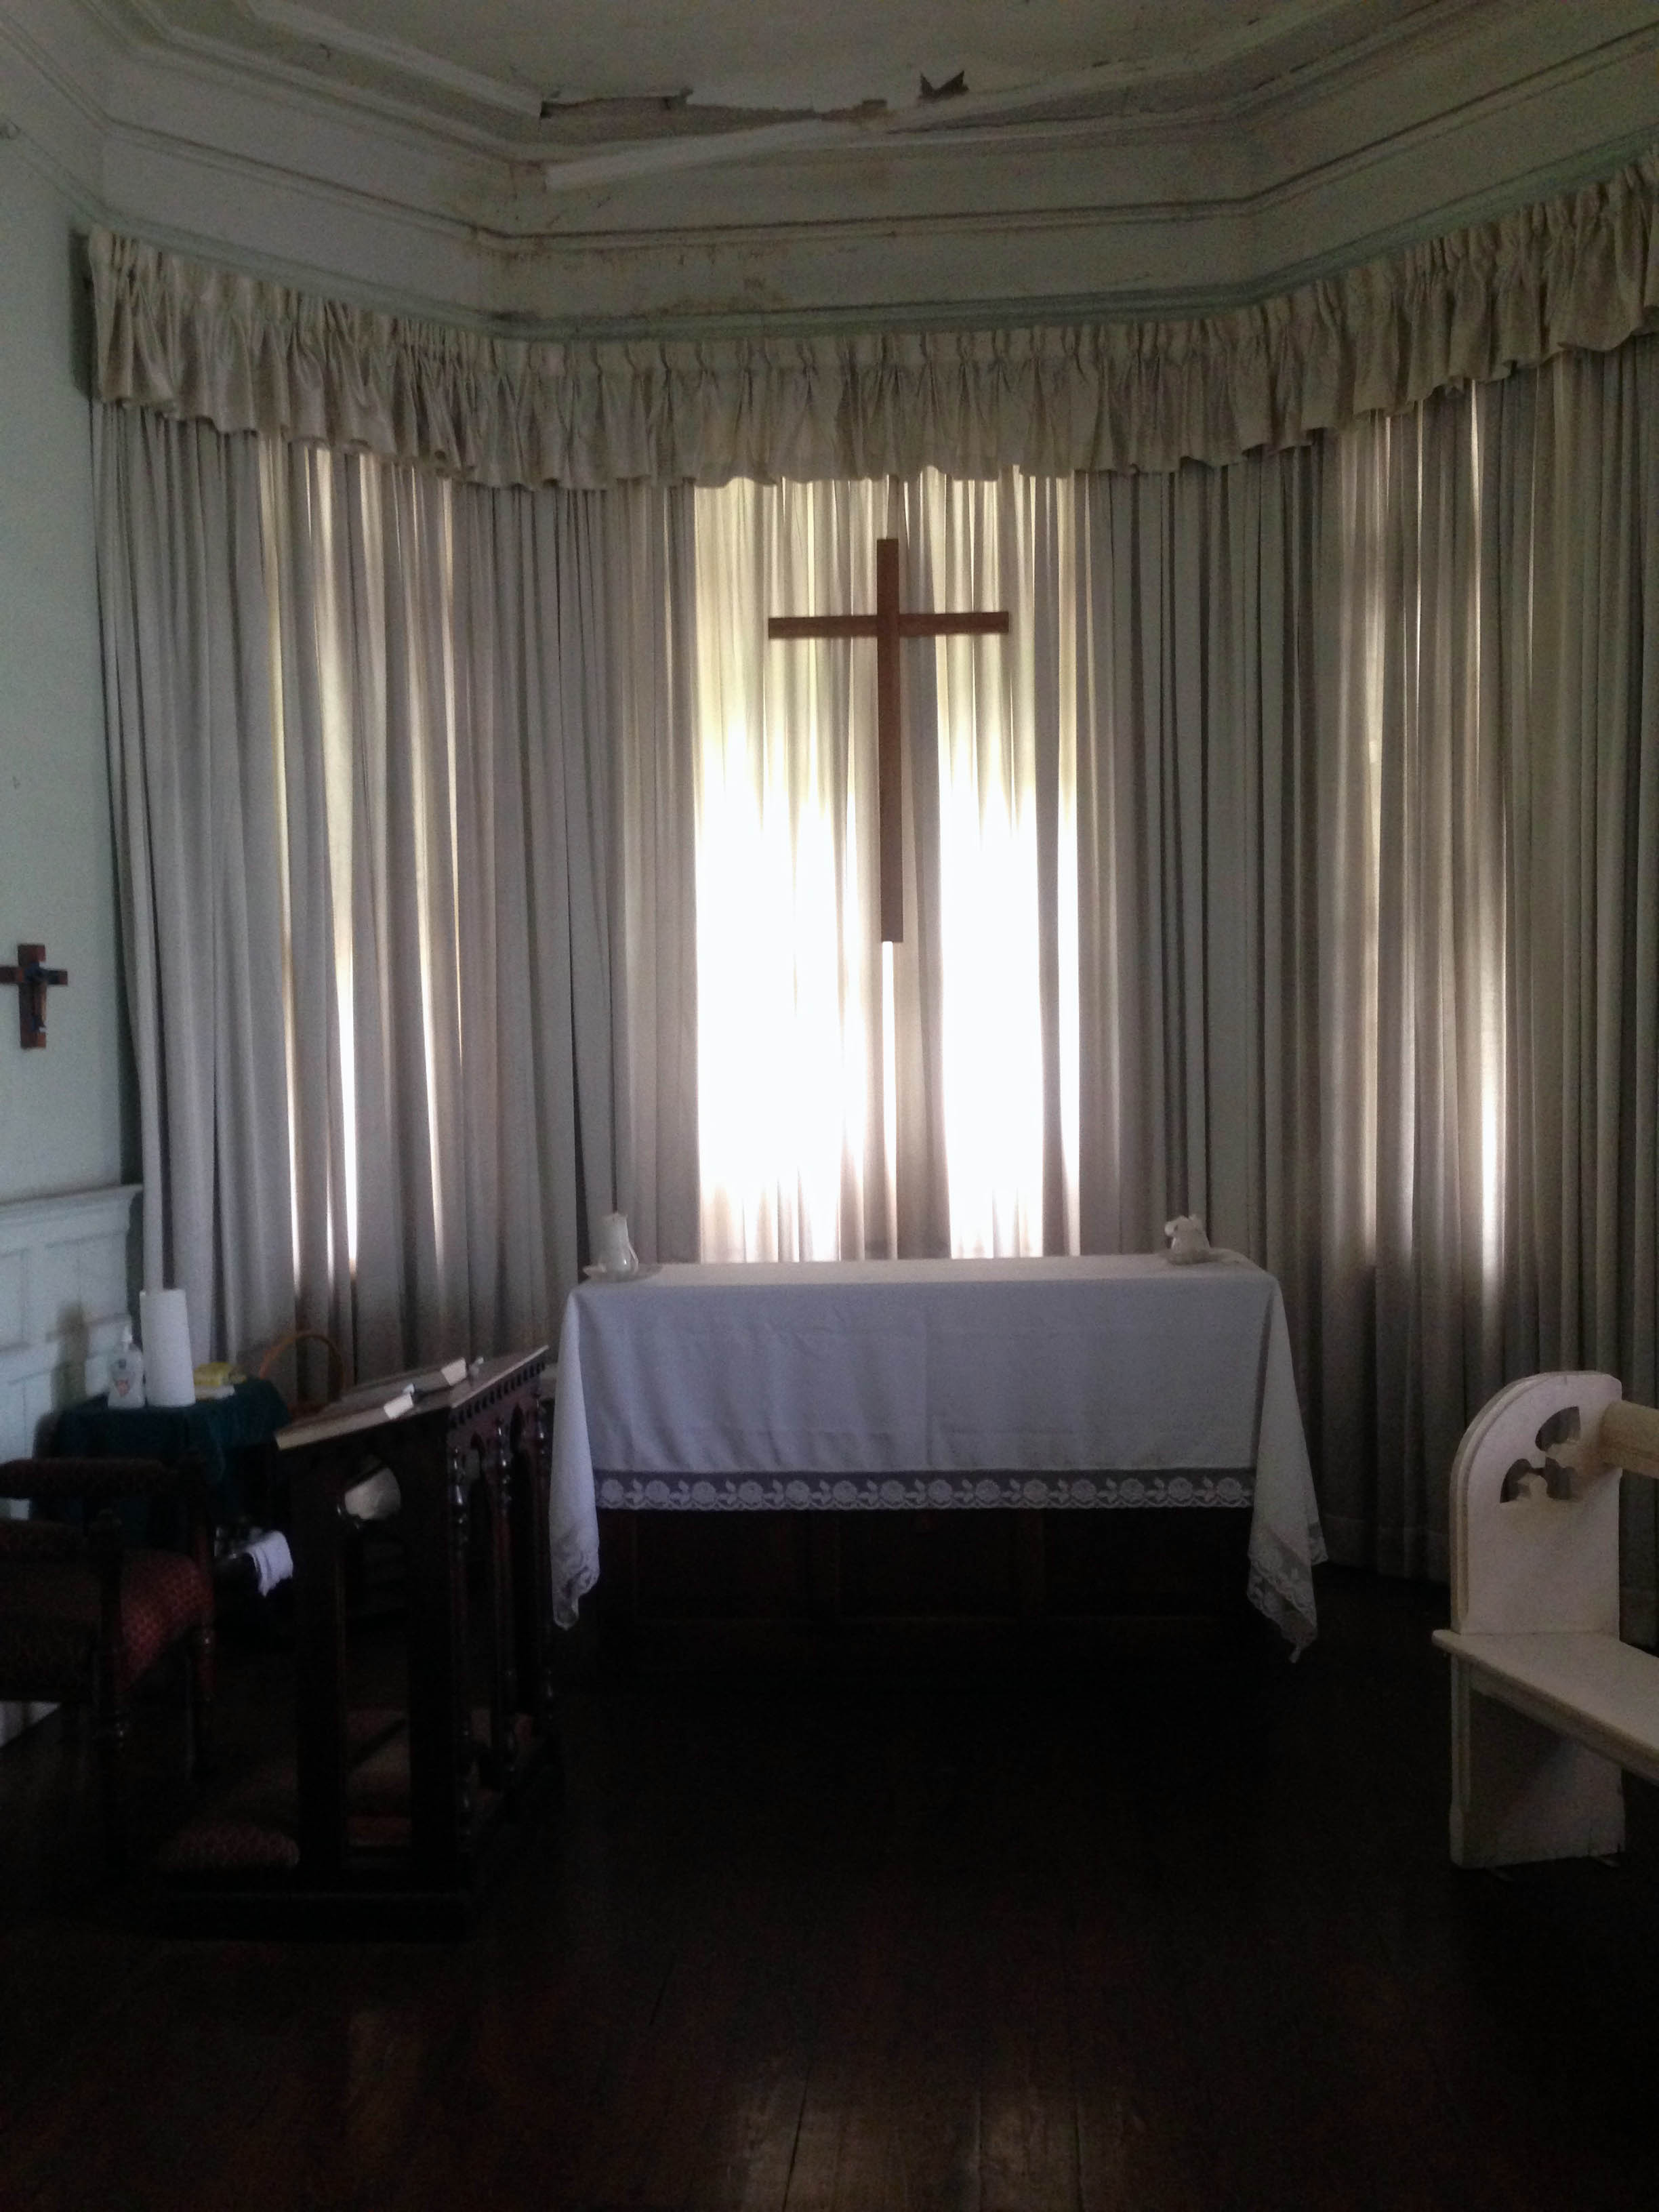 The prayer room at Hayes Court. Photo courtesy the Hayes Court Restoration Committee.